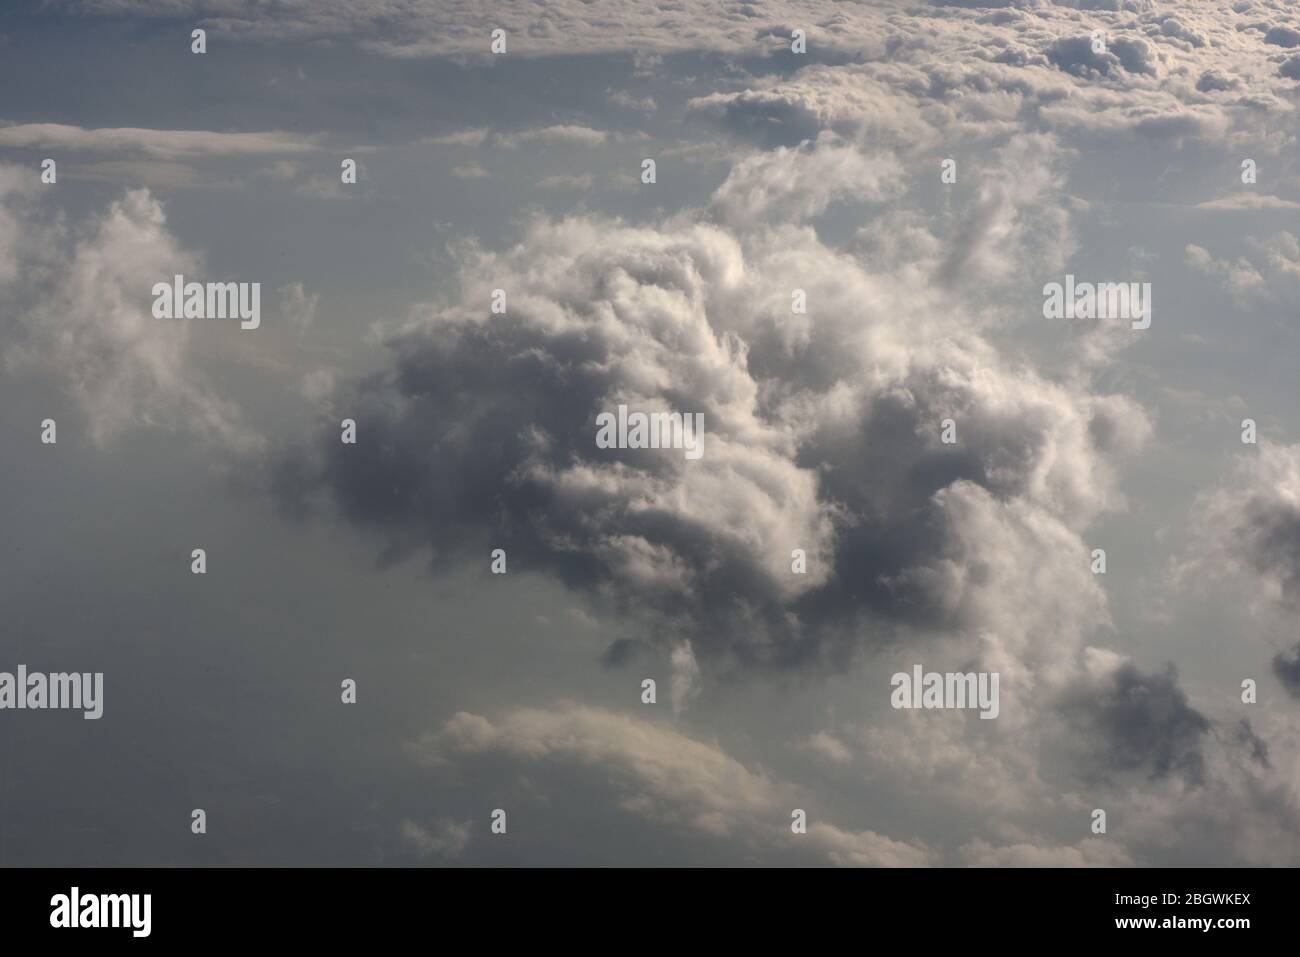 Horizontal image of a view of dark menacing cloud formations from above, looking down from an airplane Stock Photo